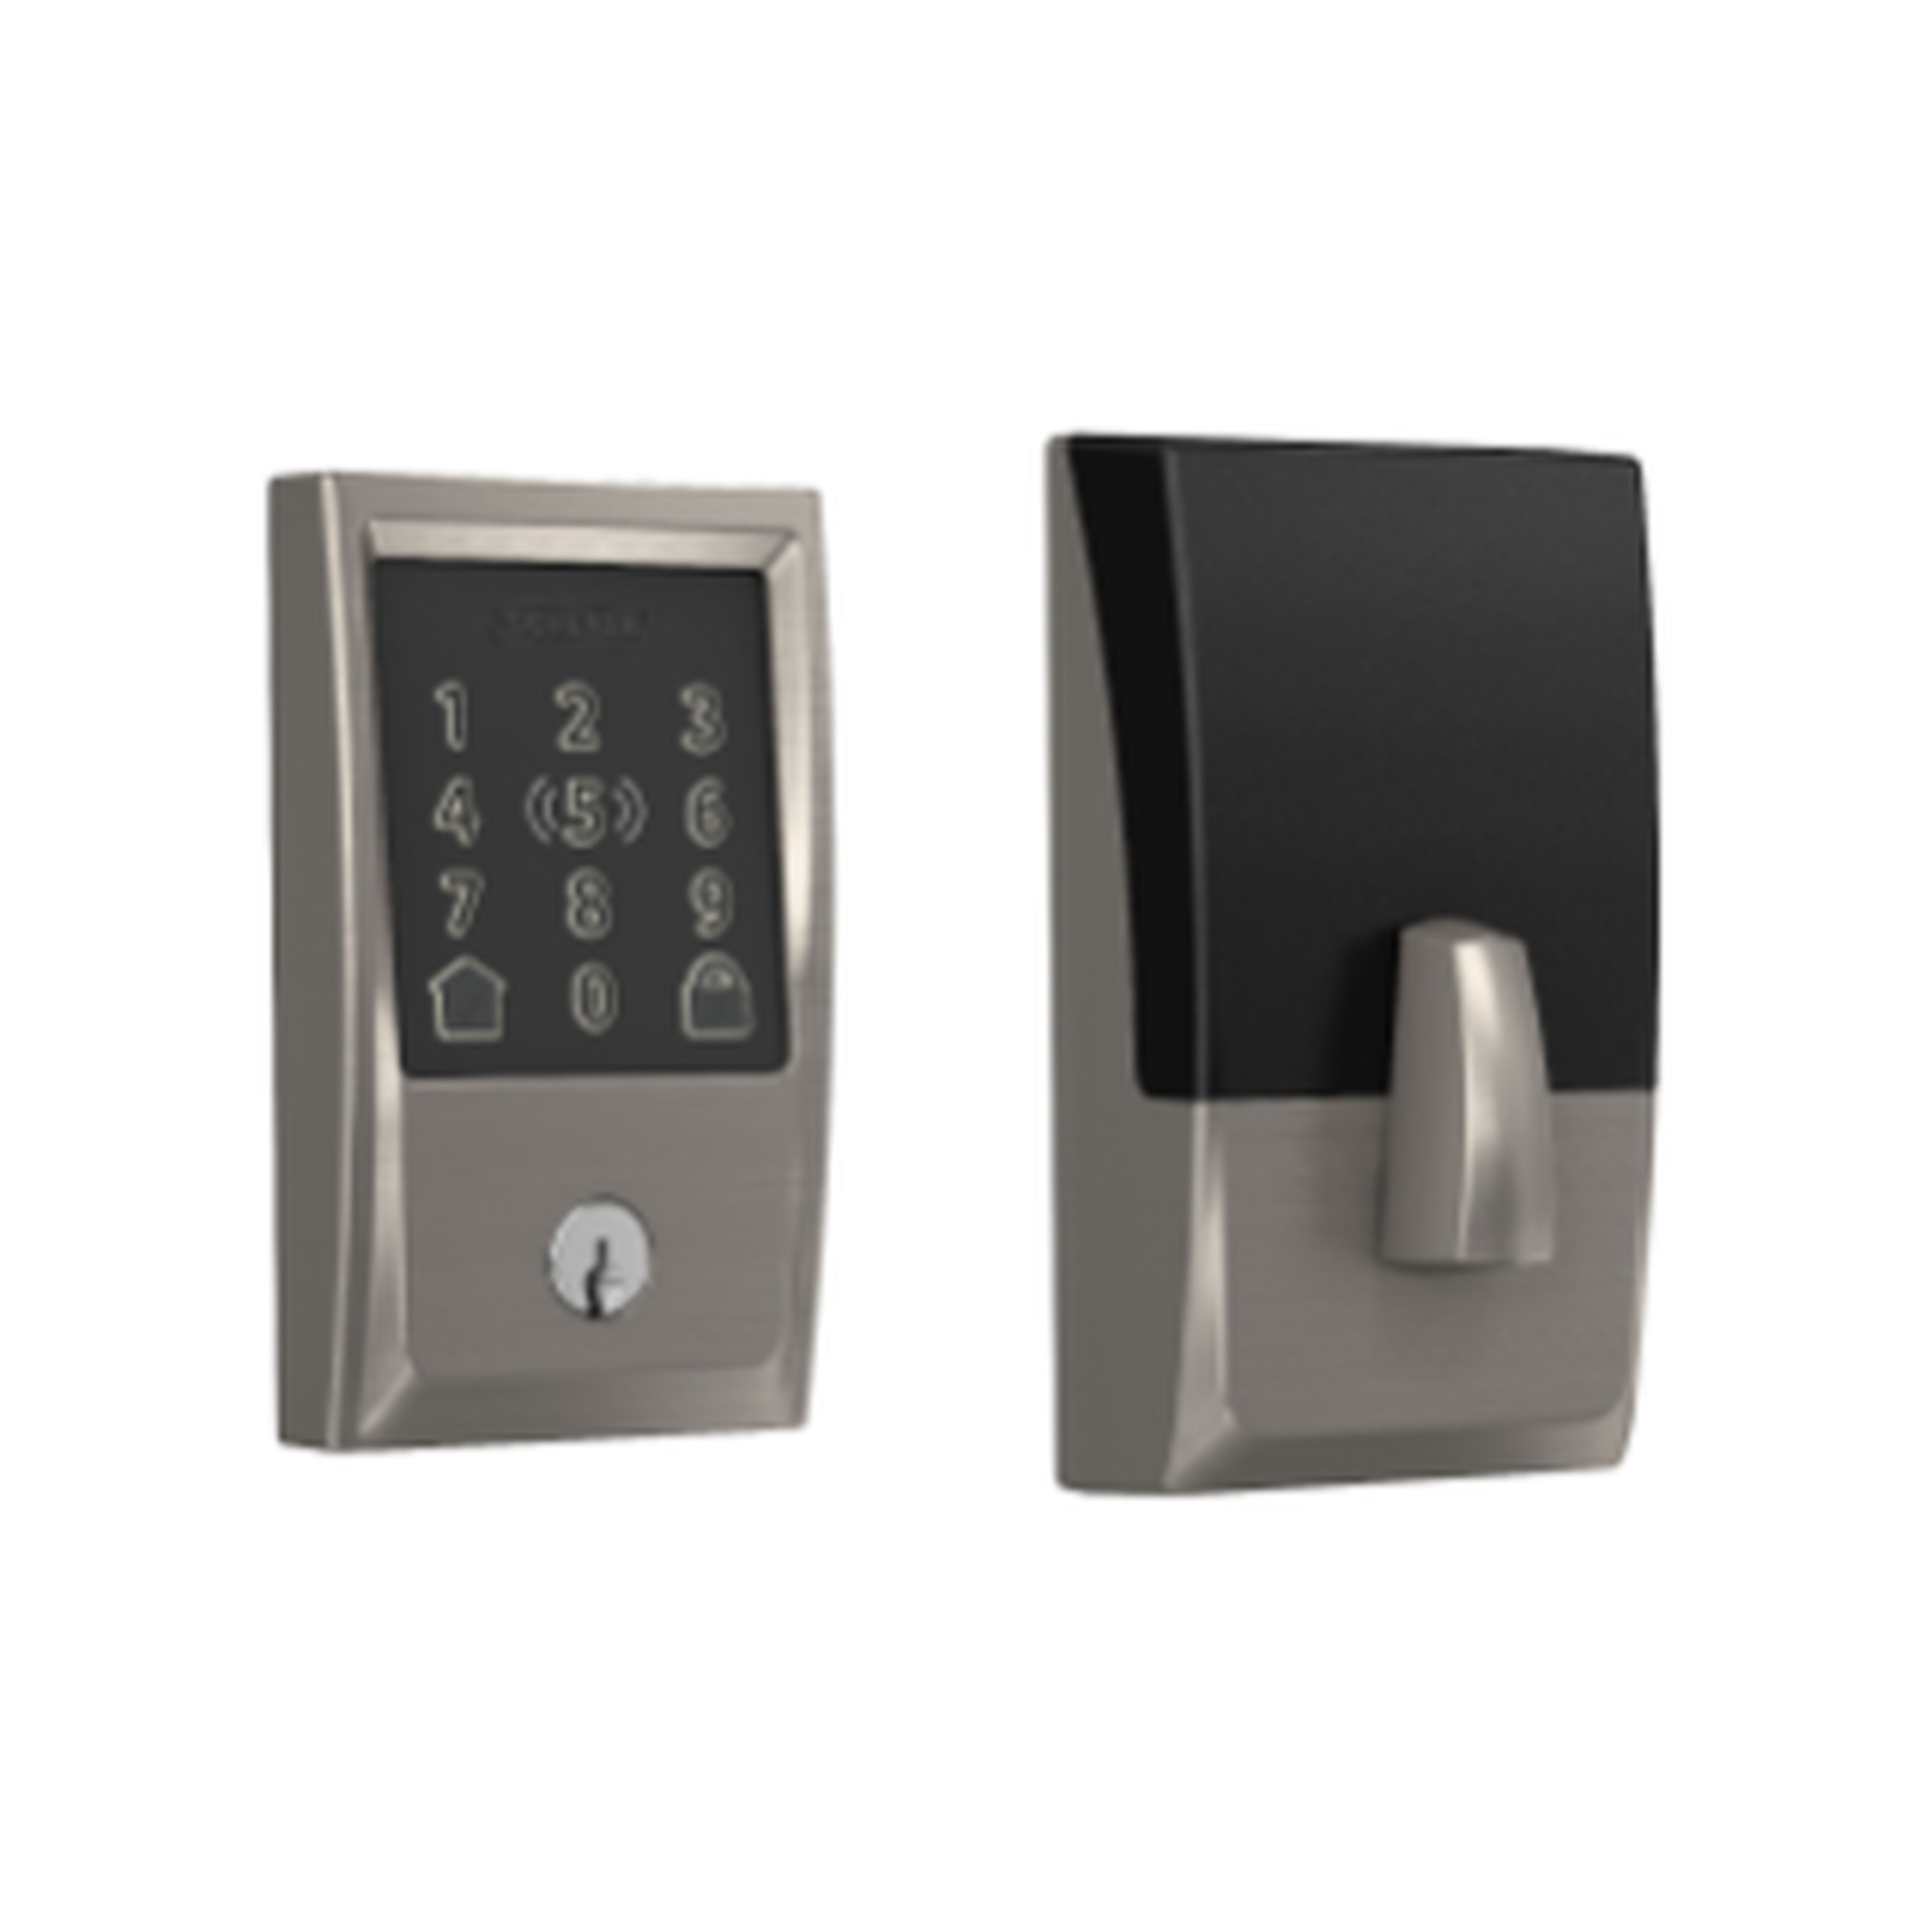 Schlage Encode Plus comes in two styles: the contemporary Century (above) and traditional Camelot (right).